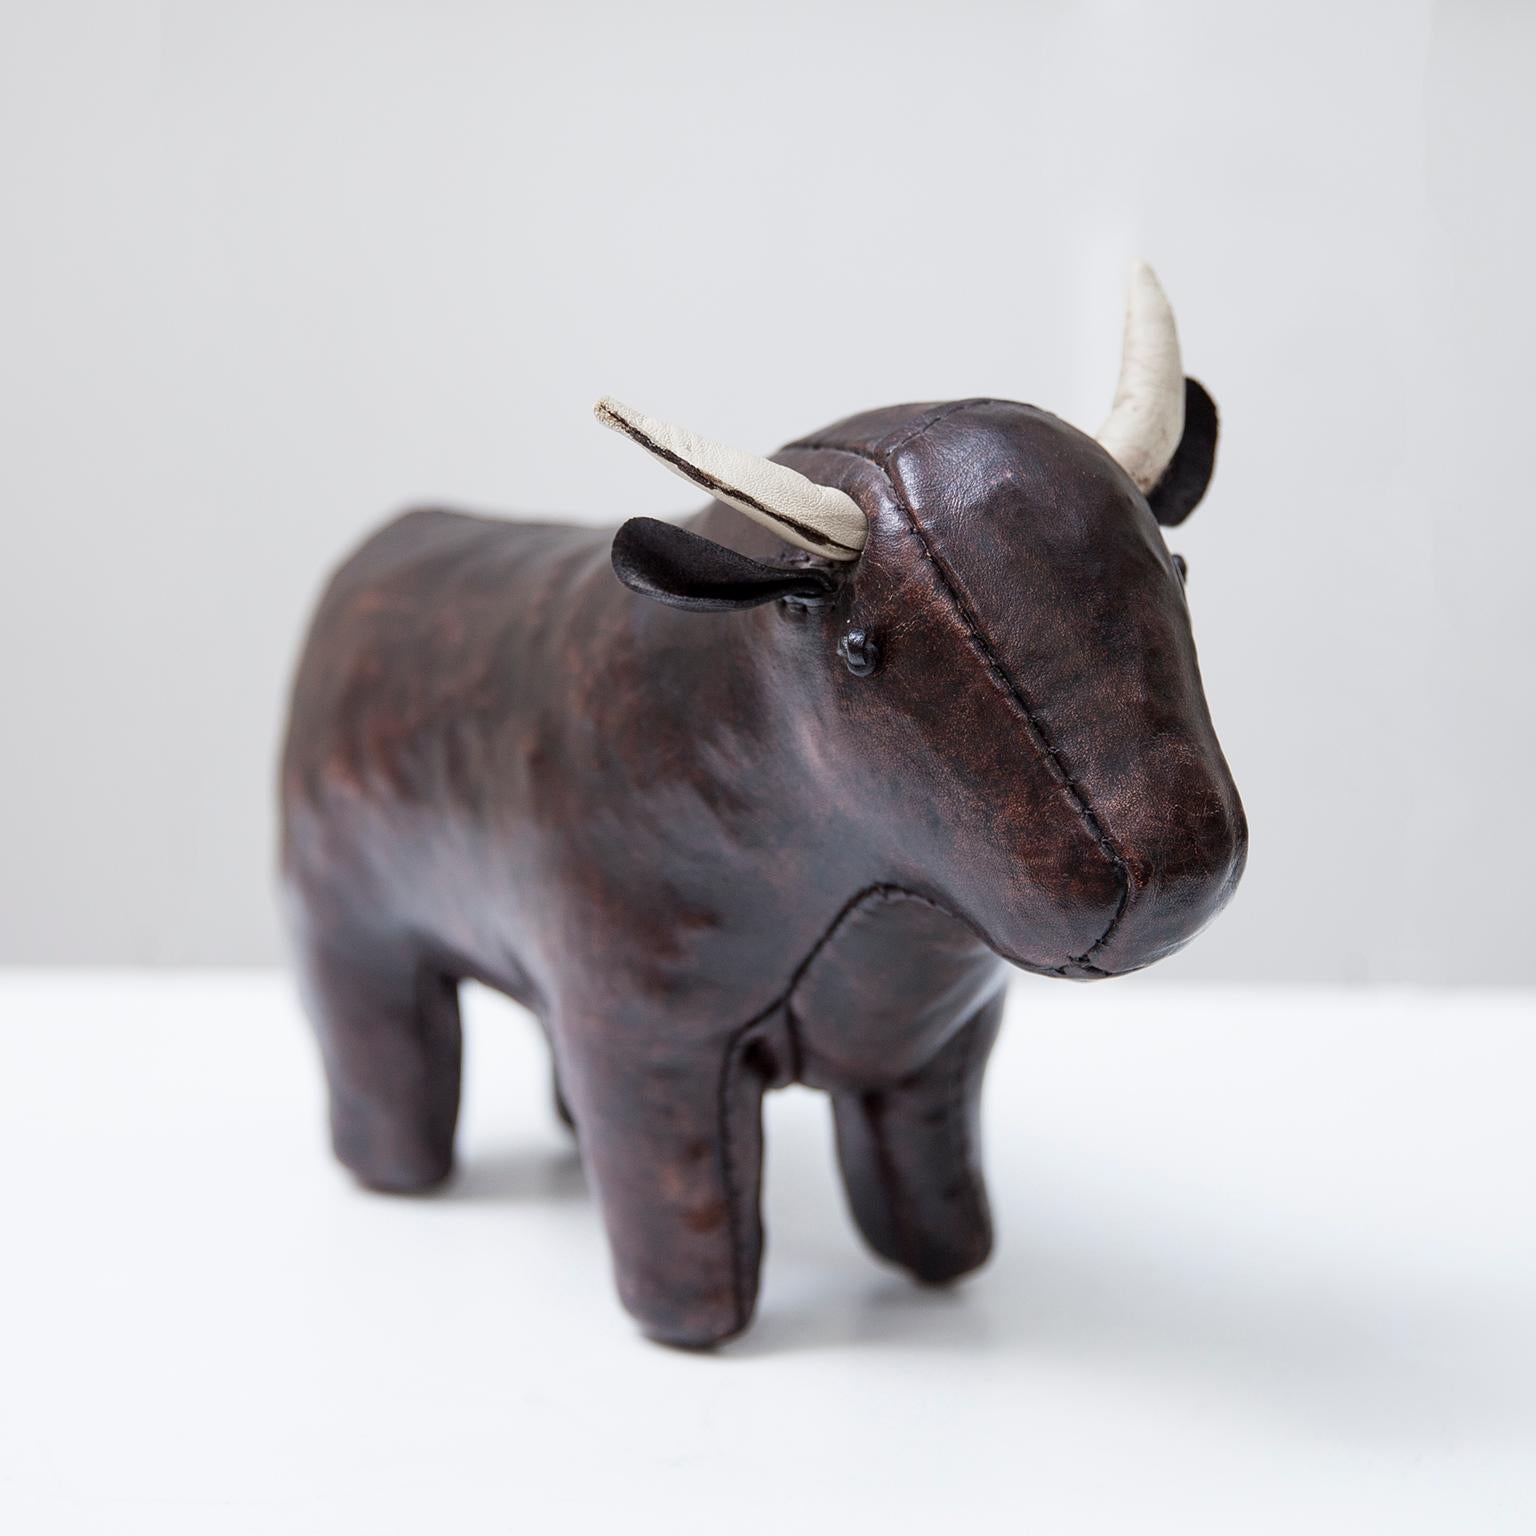 Vintage leather bull toy by Dimitri Omersa, manufactured by Omersa & Co, Lincolnshire England for Liberty’s of London.

  